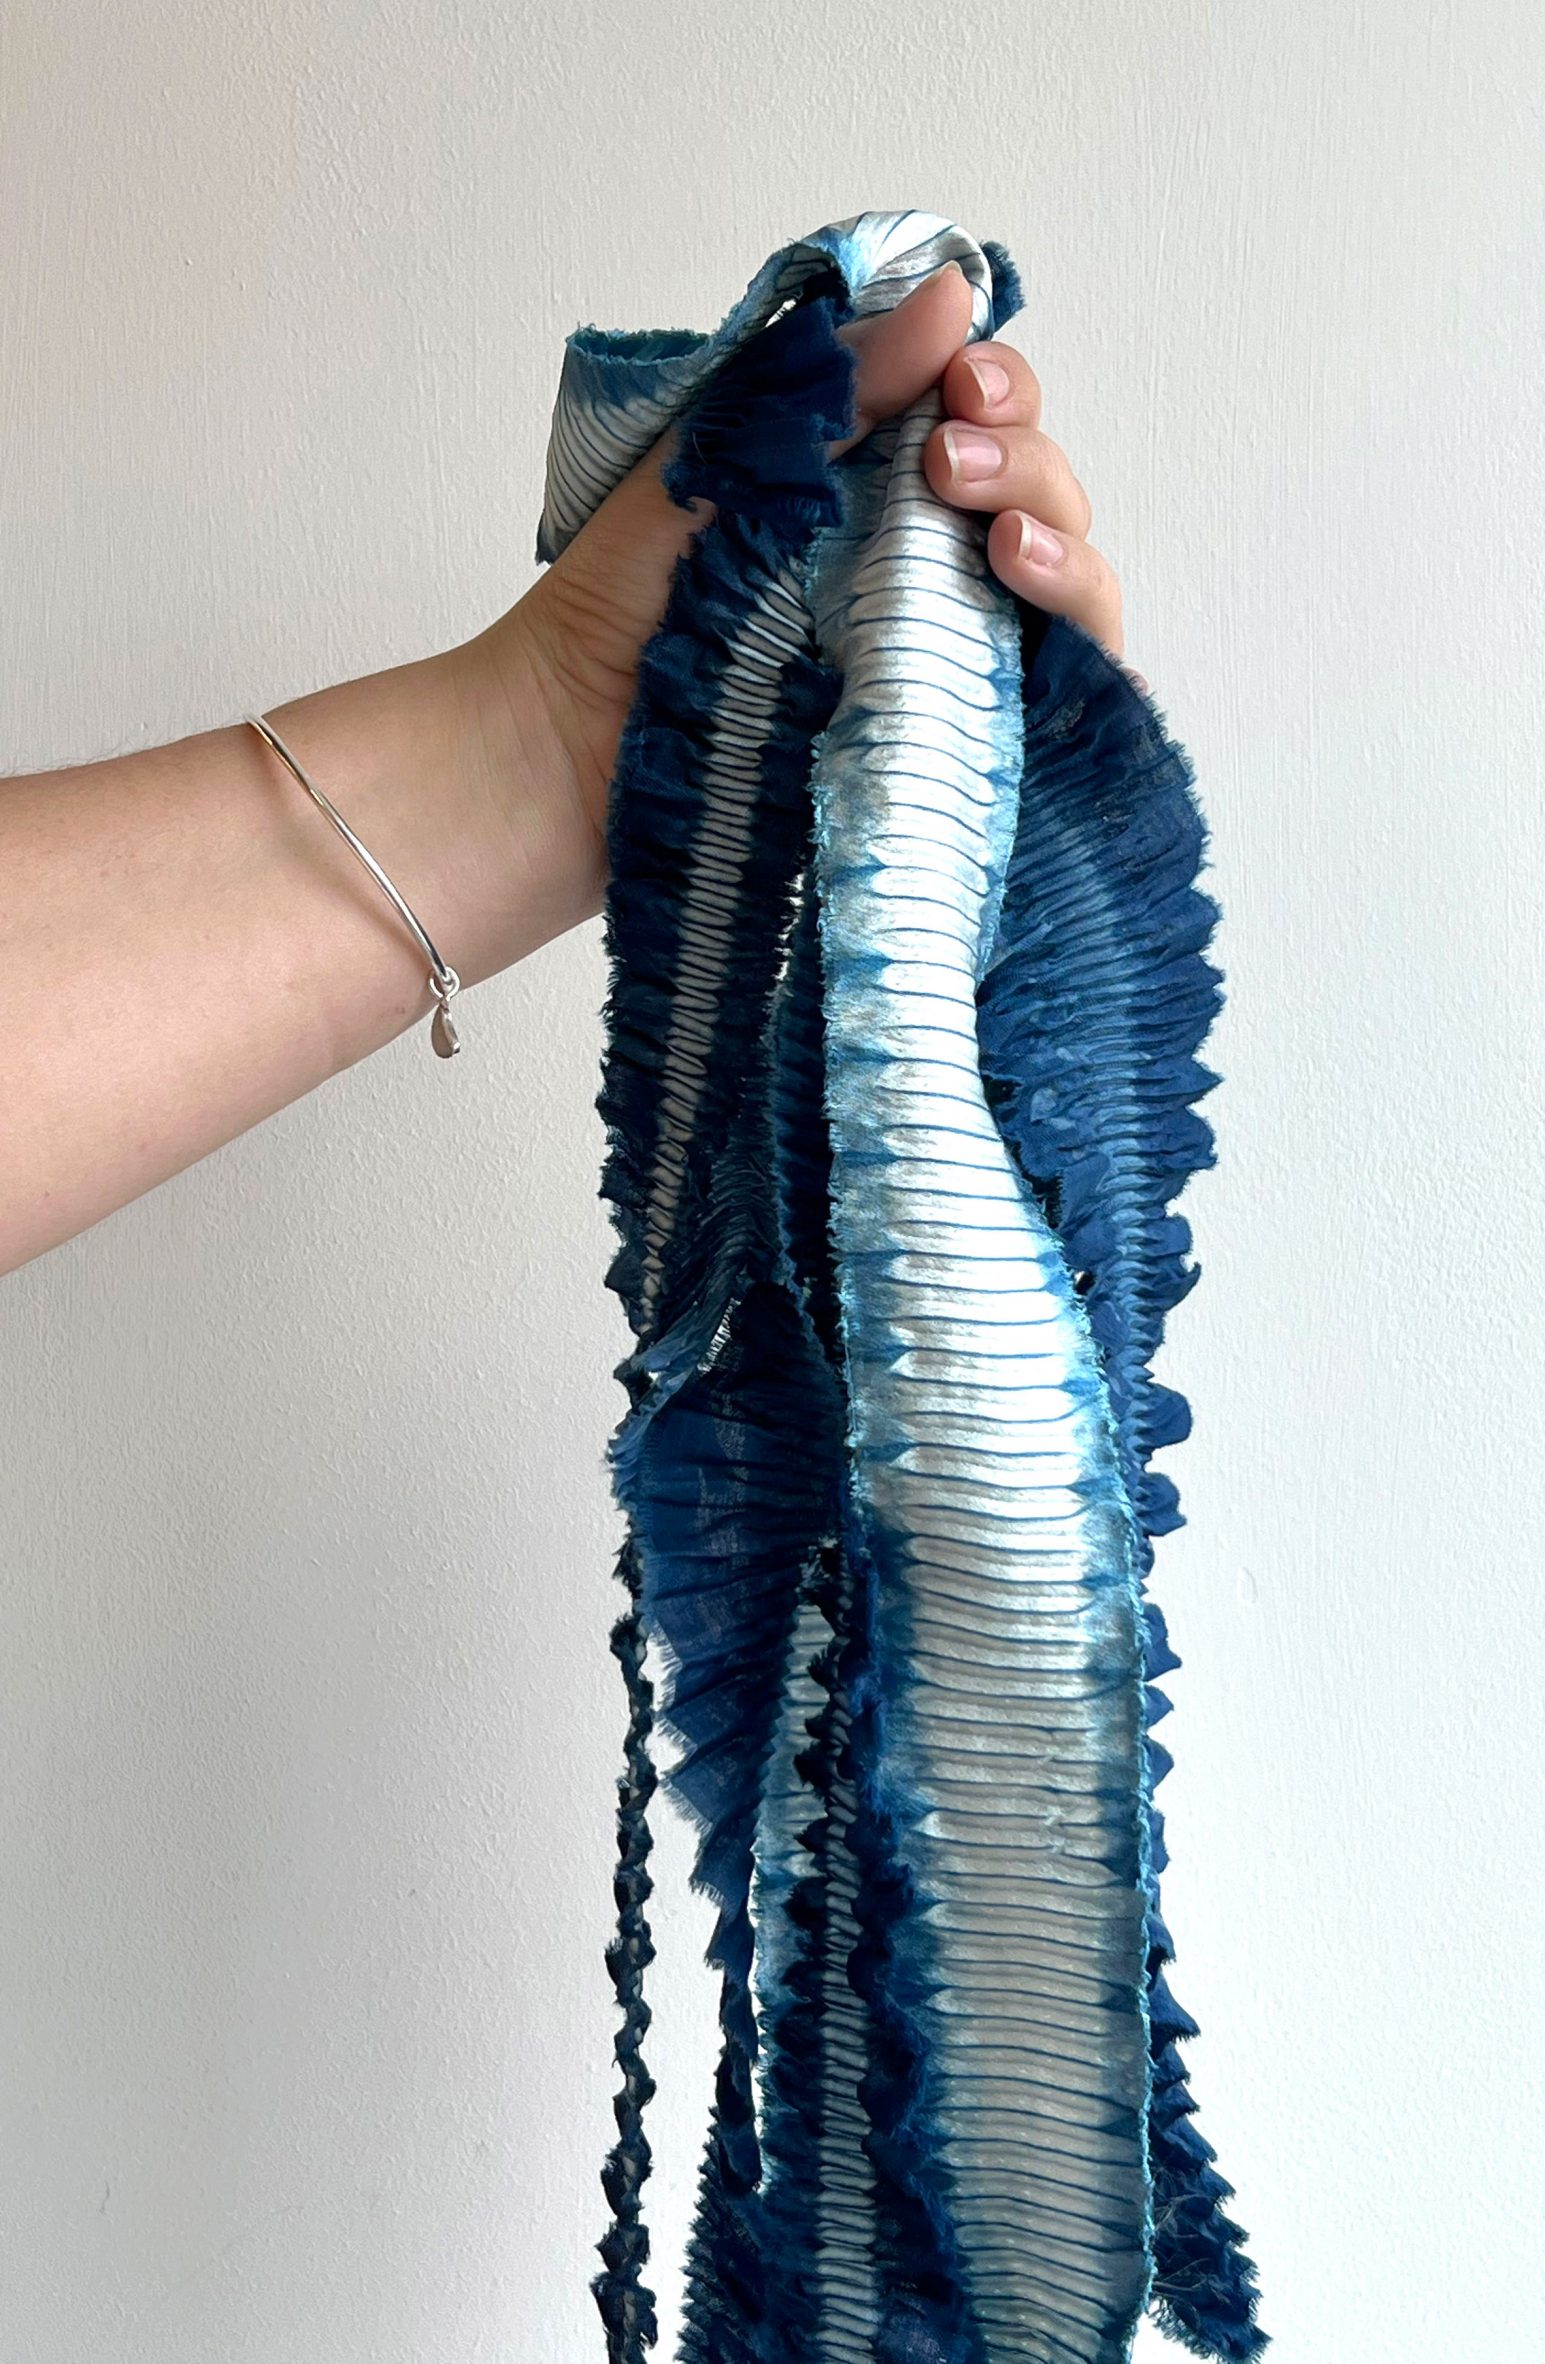 Hand grasping blue and white crimped textile